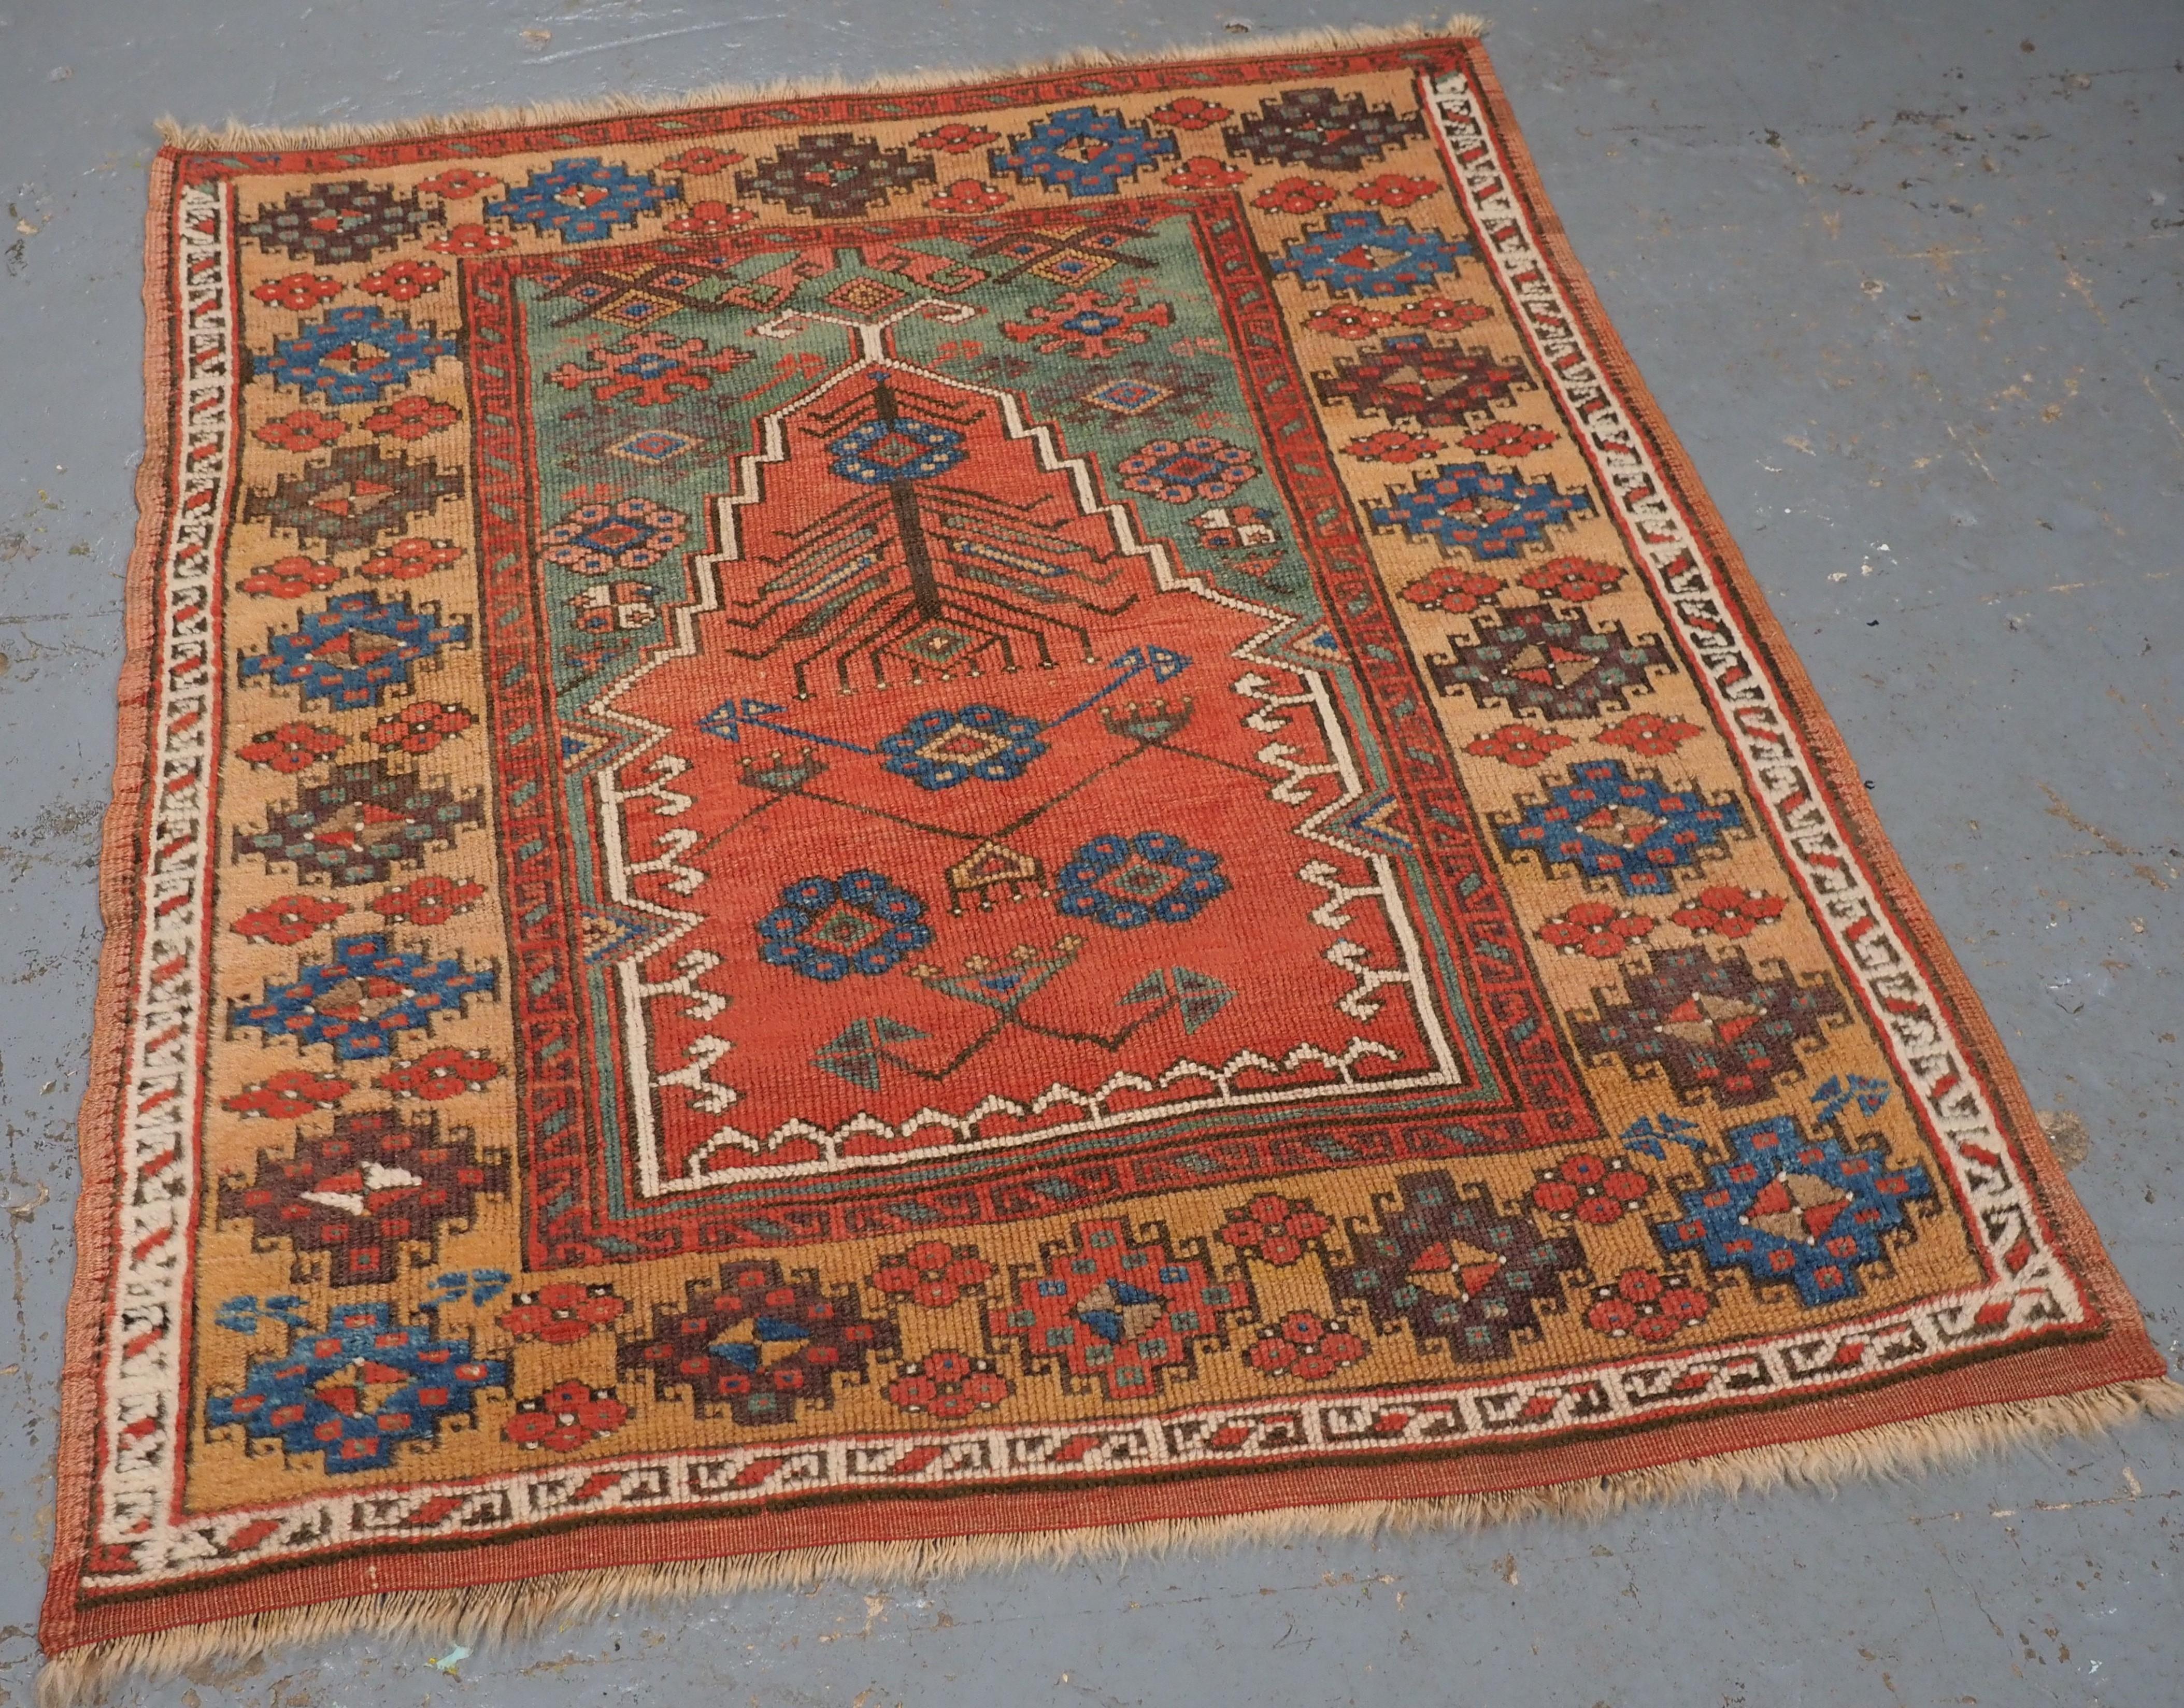 ize: 4ft 3in x 3ft 6in (130 x 106cm).

Antique Central Anatolian Konya region village prayer rug.

Circa 1850.

A superb example of a Konya prayer rug, the soft red central mihrab is floating on a green ground, the rug is framed by a main border in